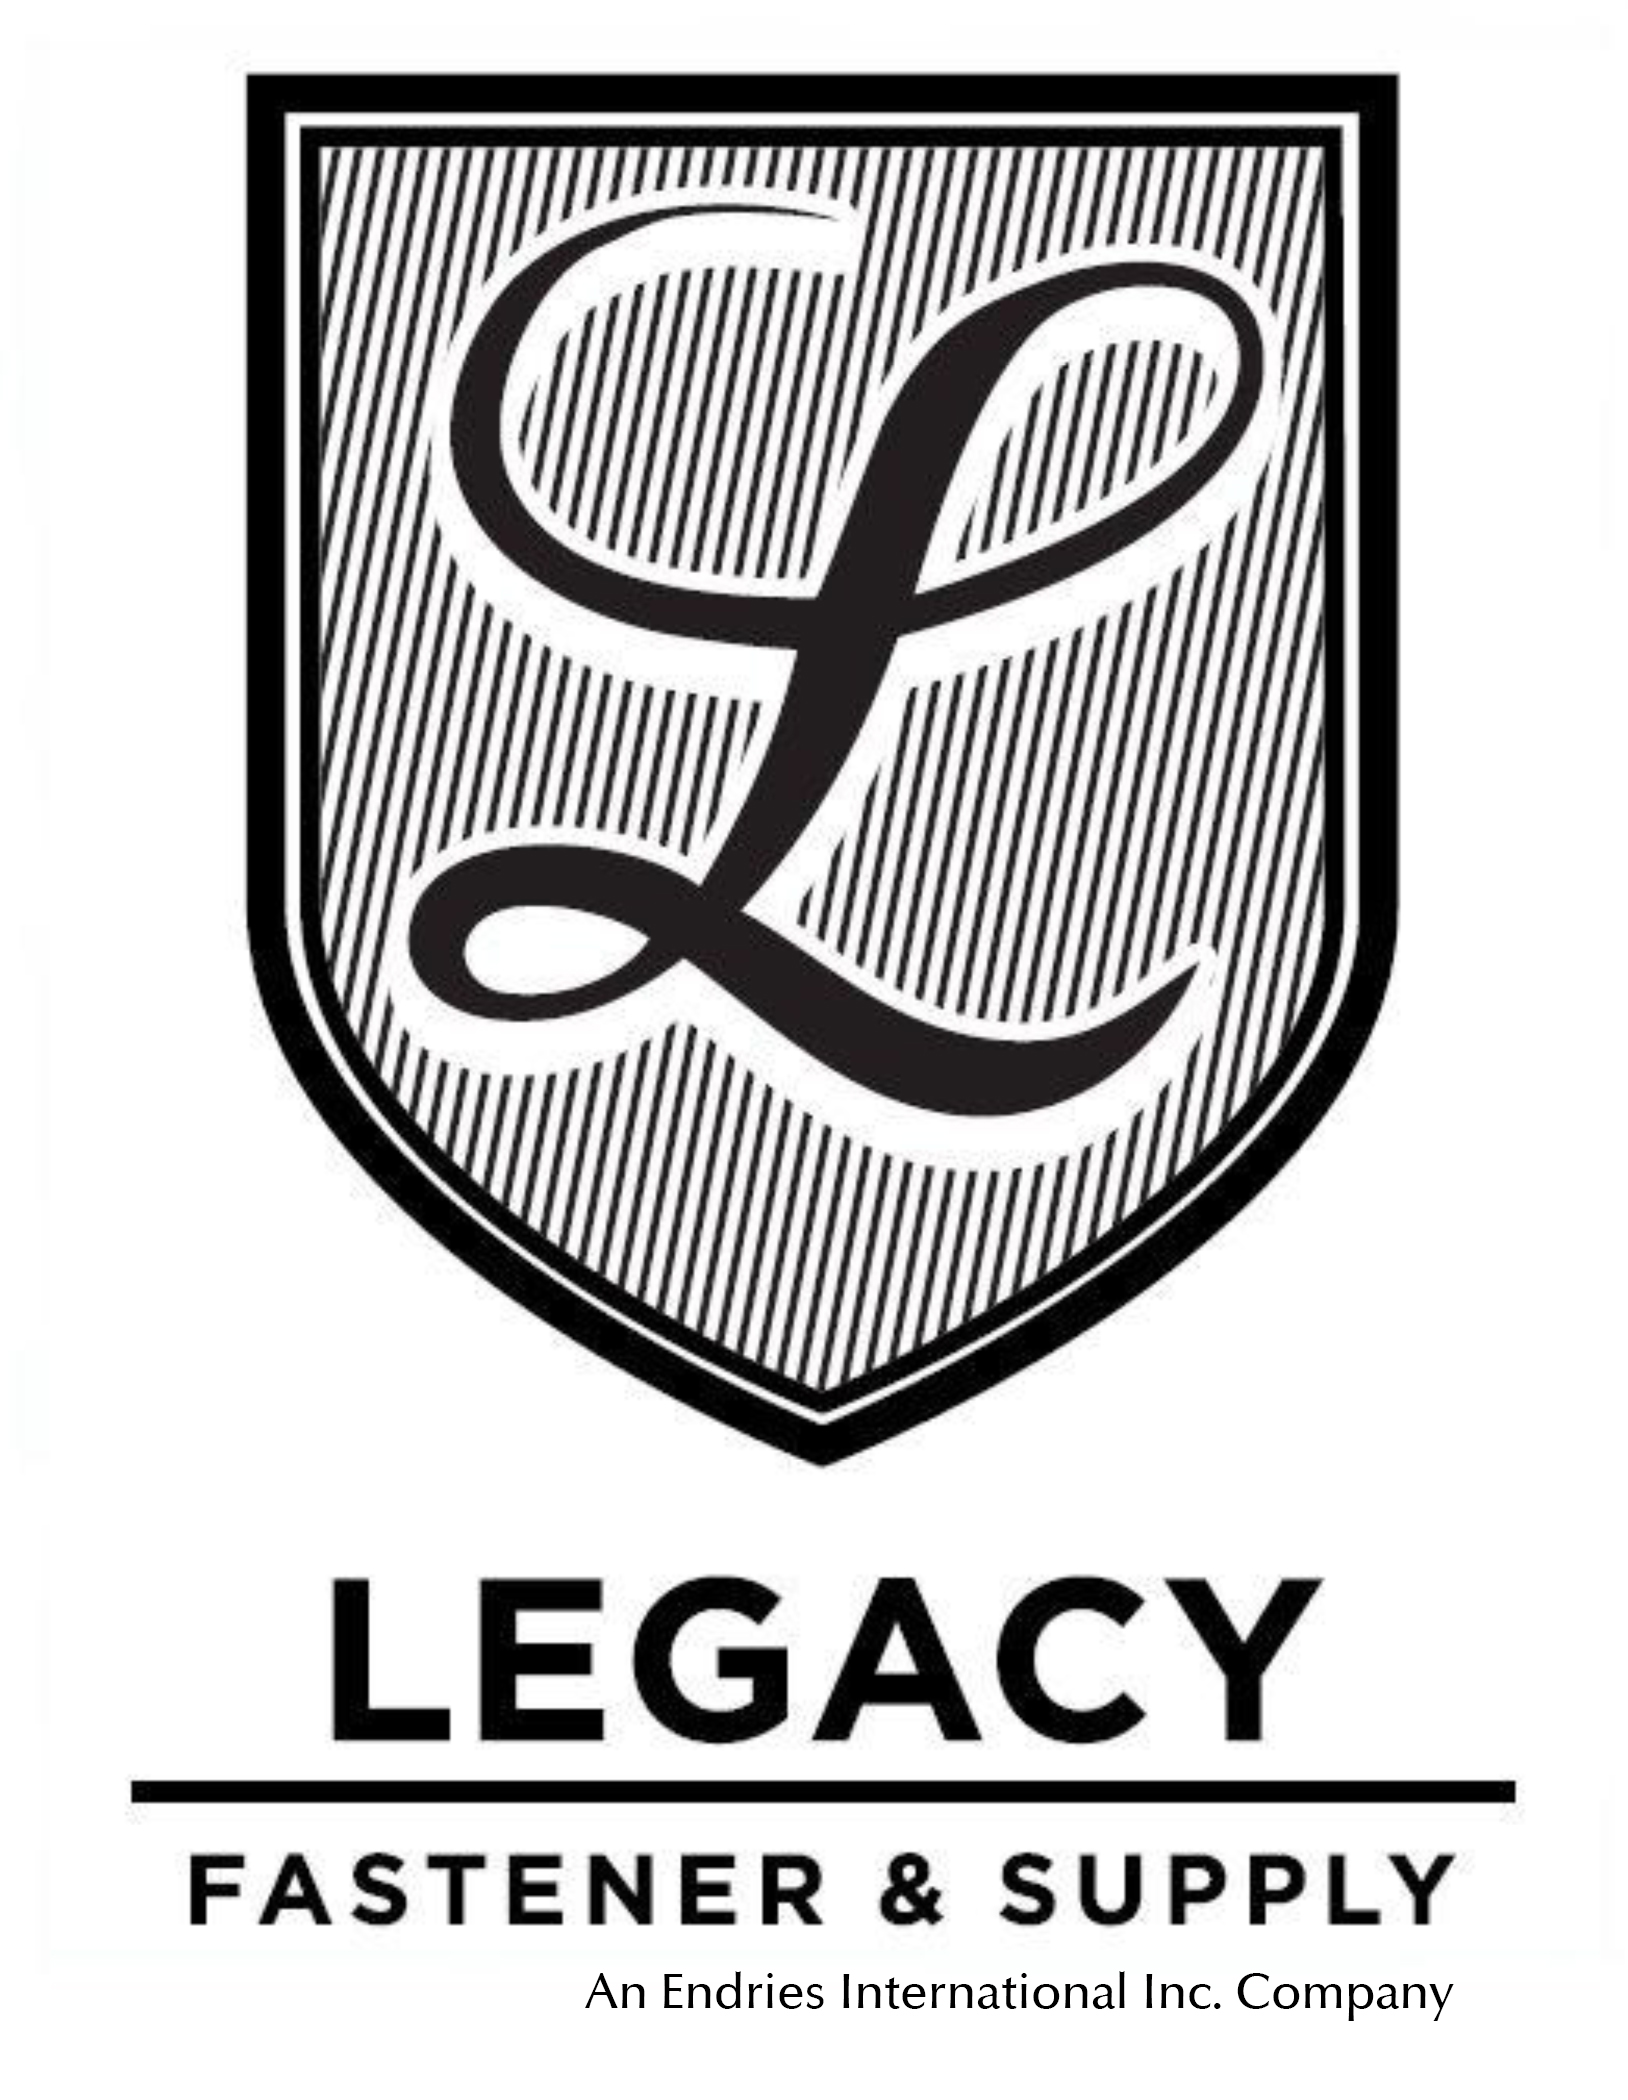 Legacy Fastener and Supply was acquired by Endries in 2018